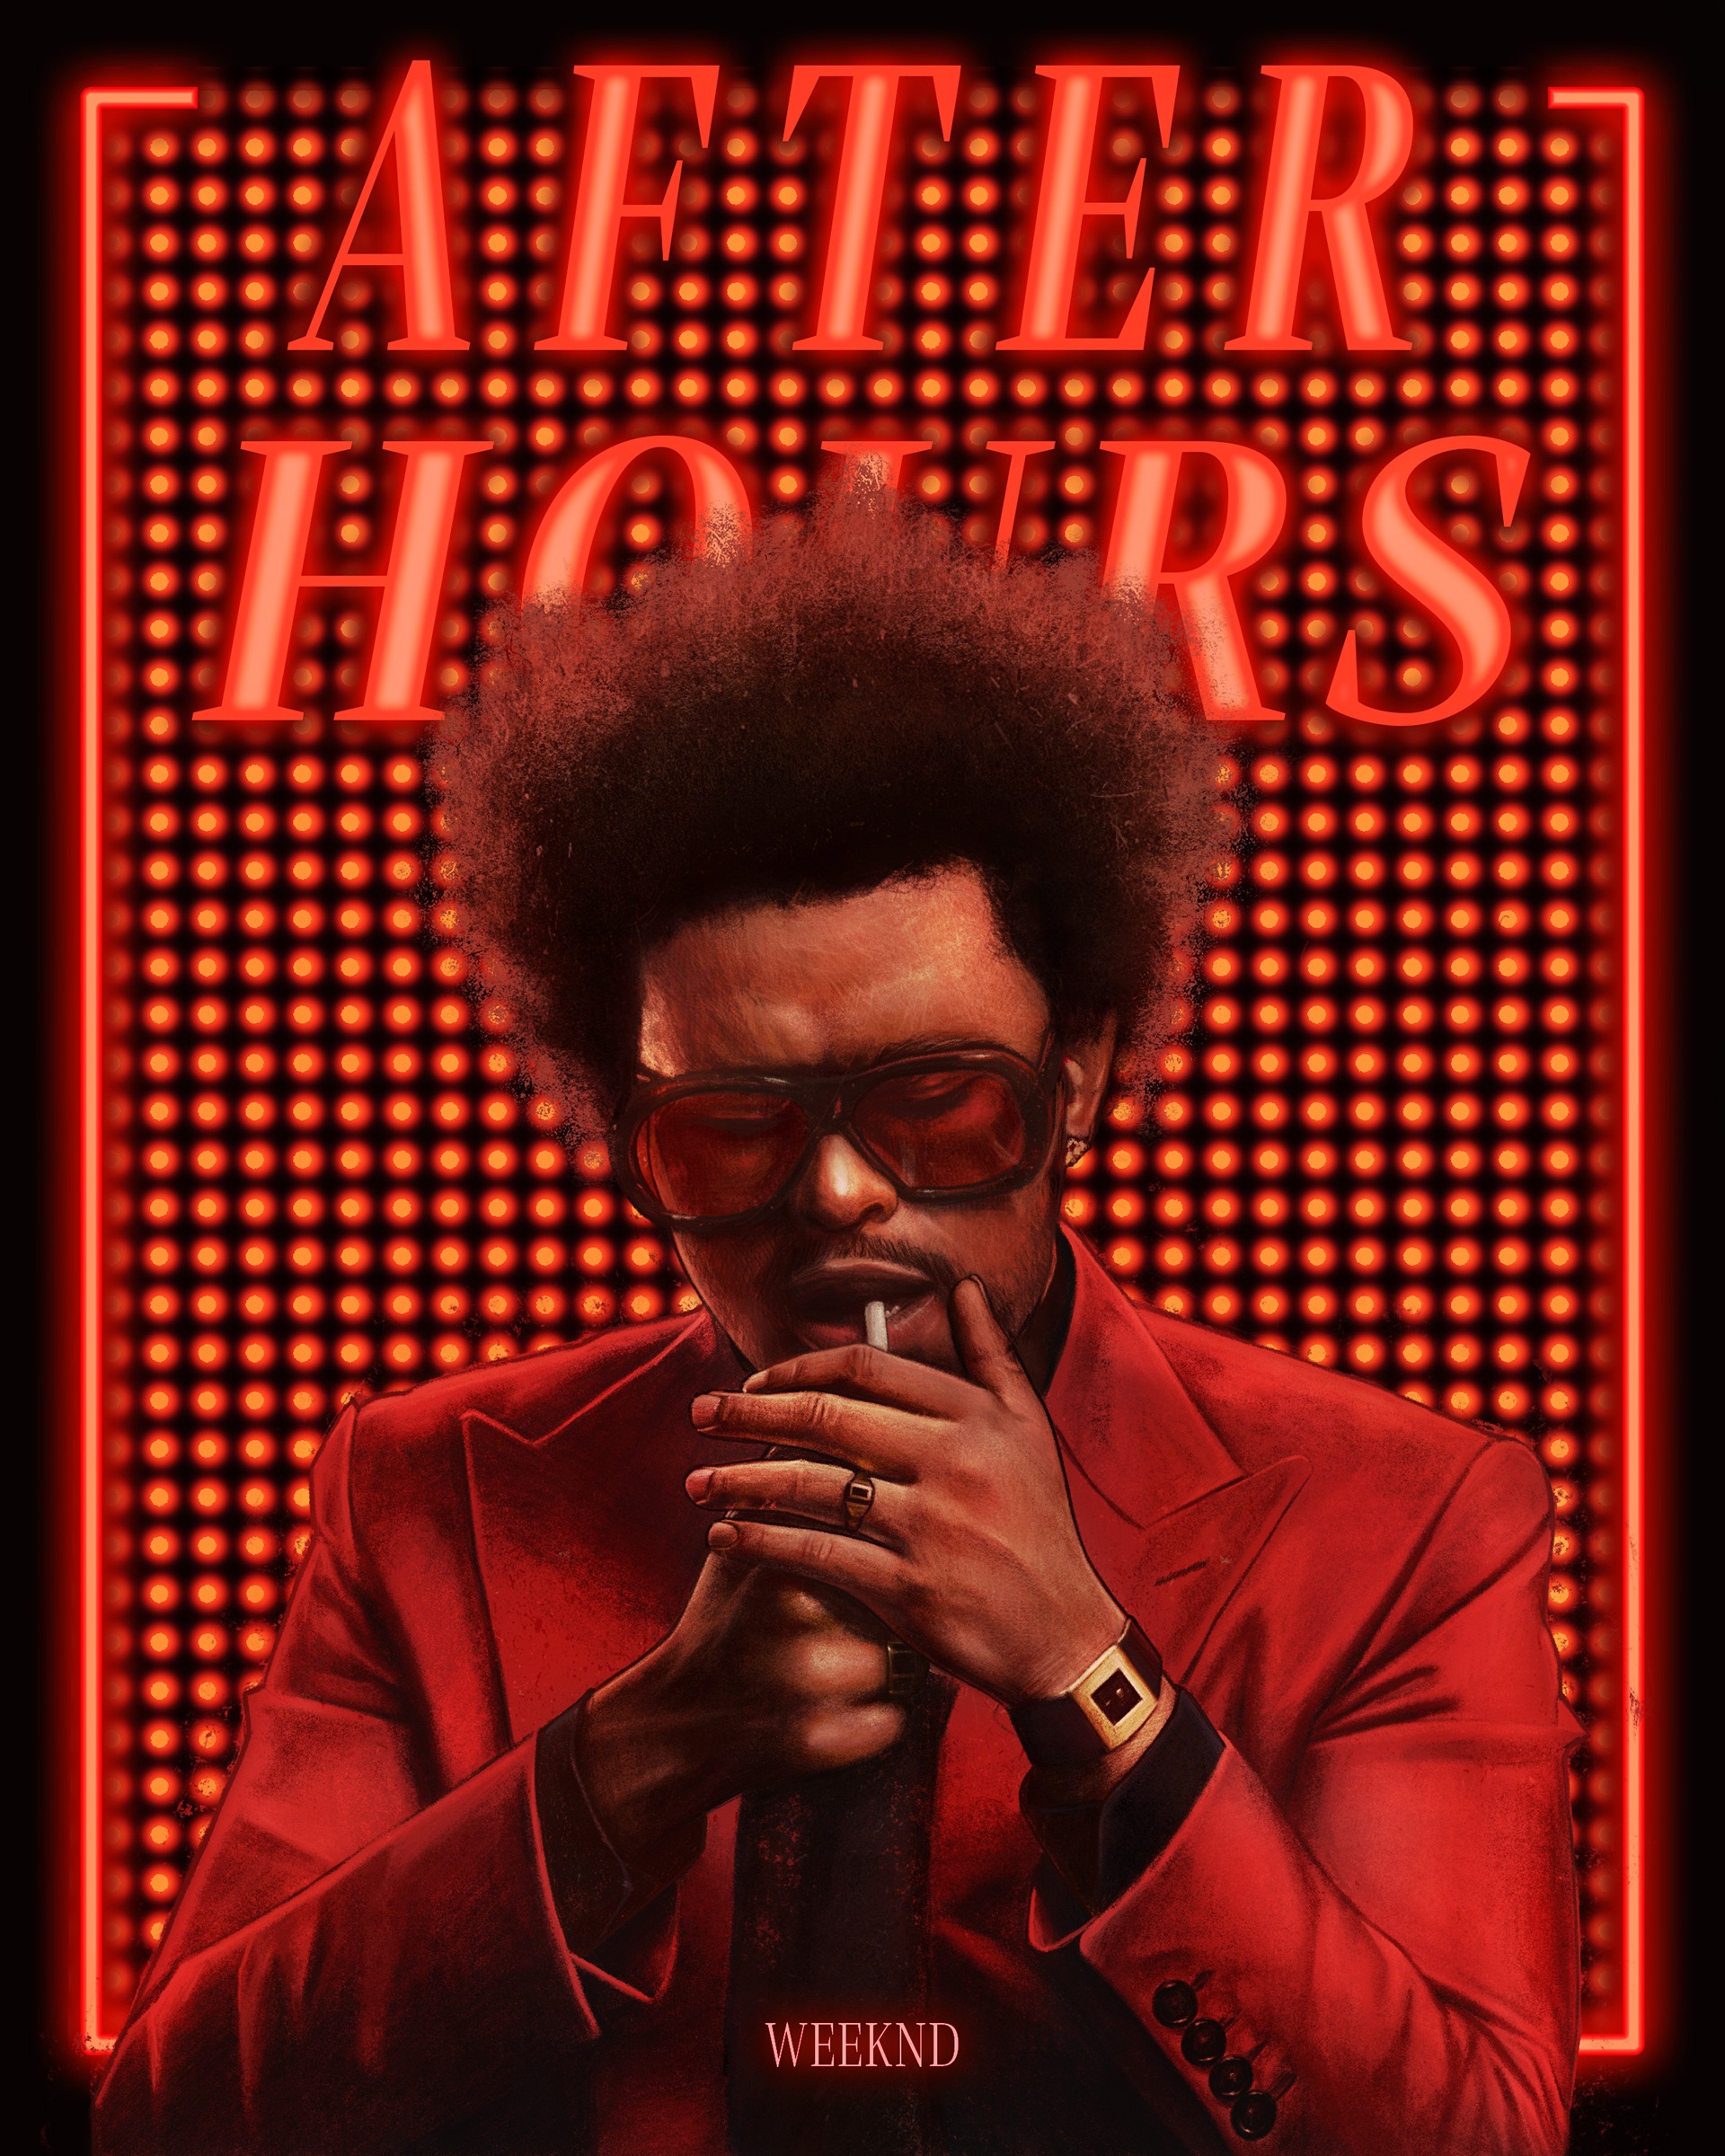 After poster. The Weeknd Постер. After hours обложка. Weeknd "after hours".